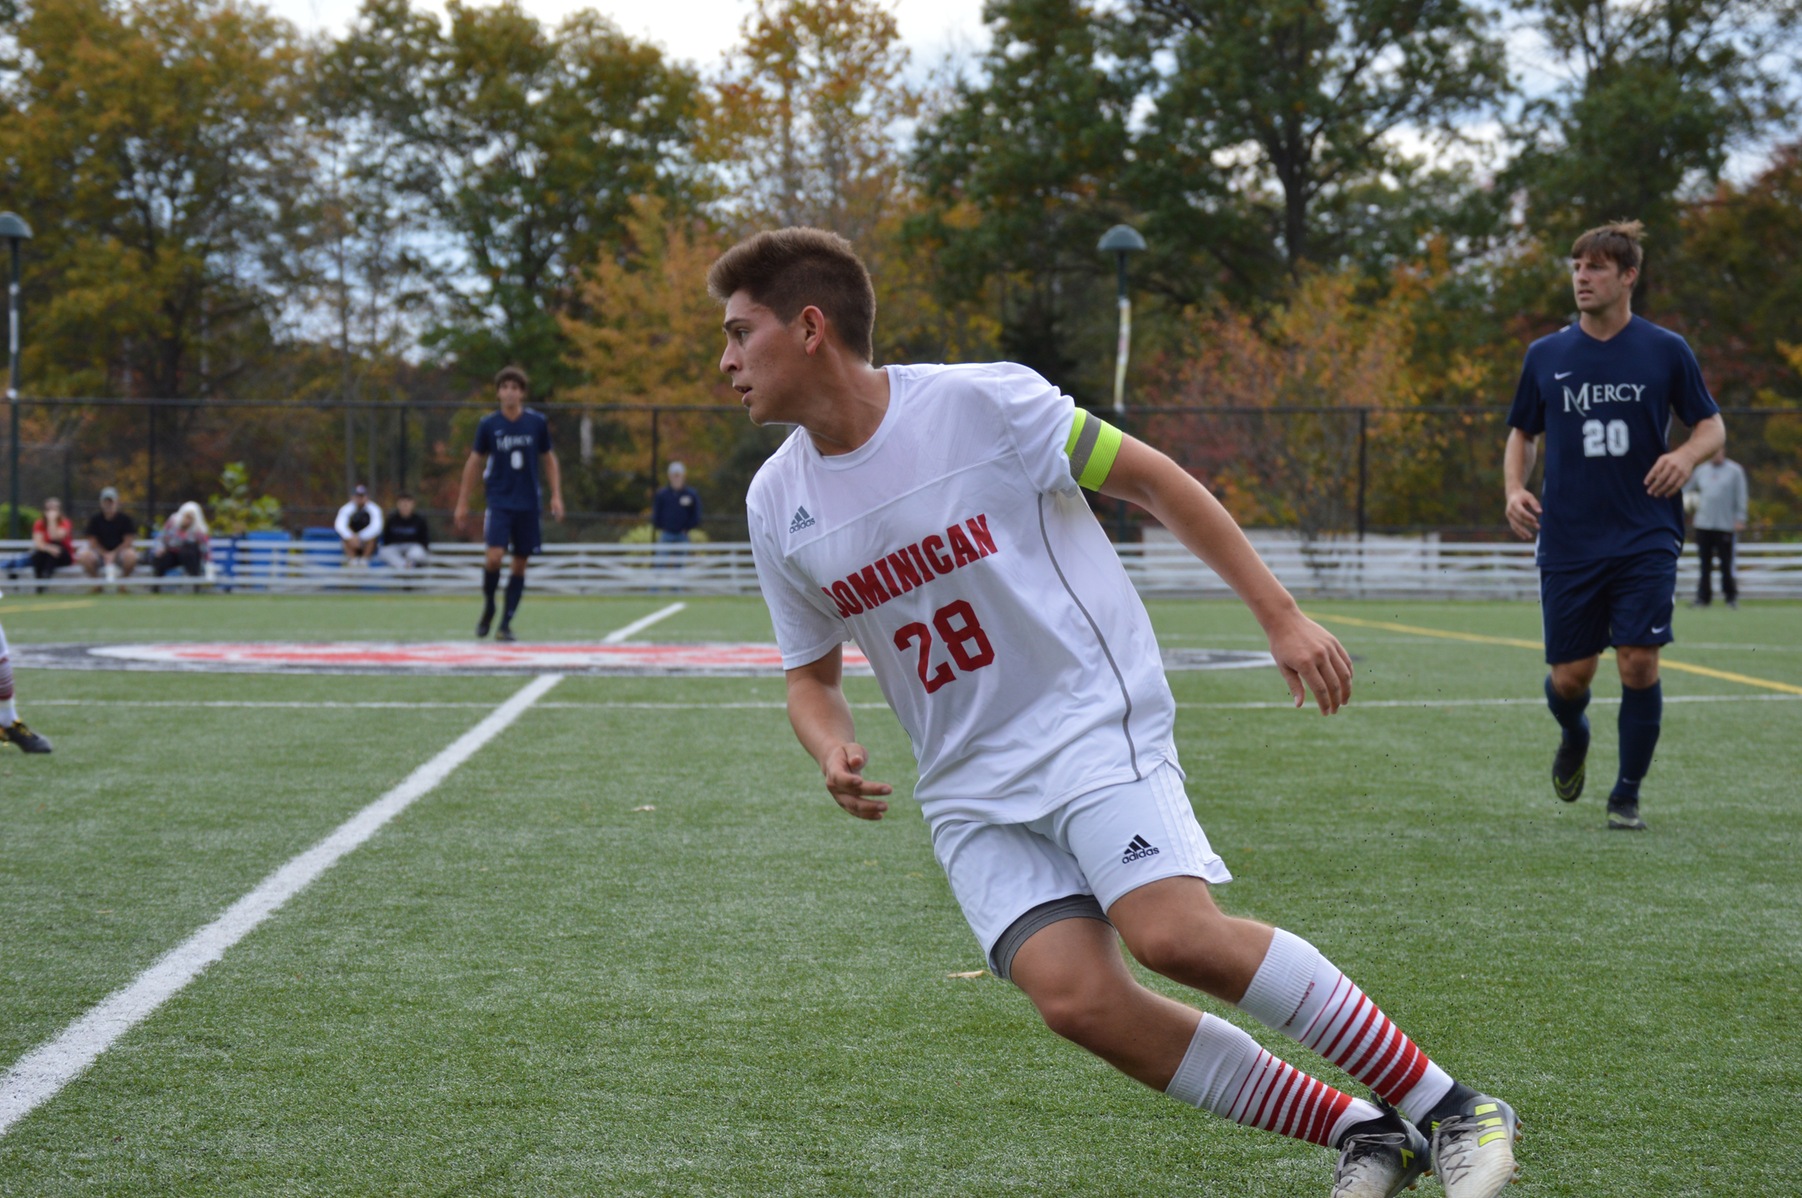 ATKINSON'S OT WINNER GIVES CHARGERS FIRST WIN OVER NYACK